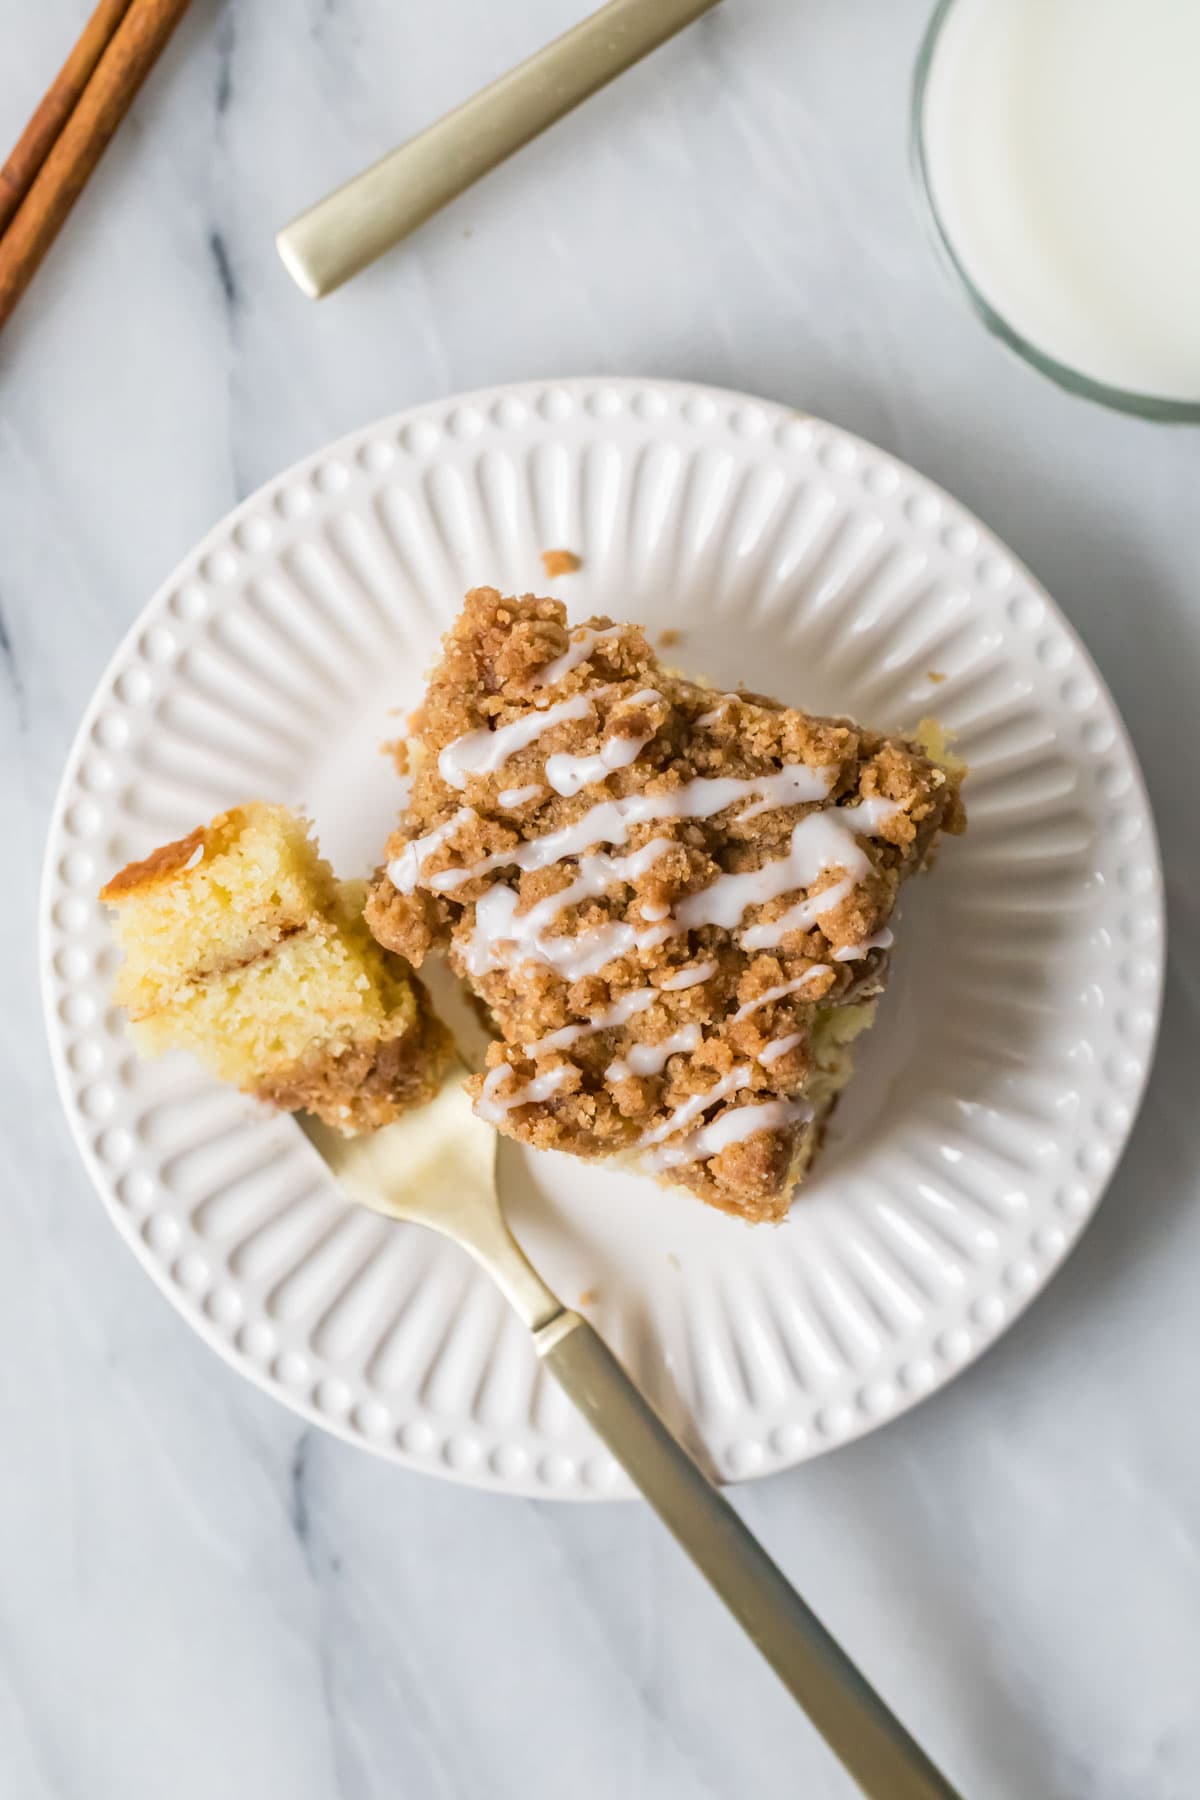 Overhead view of a slice of sour cream coffee cake with one bite on a fork beside the cake.